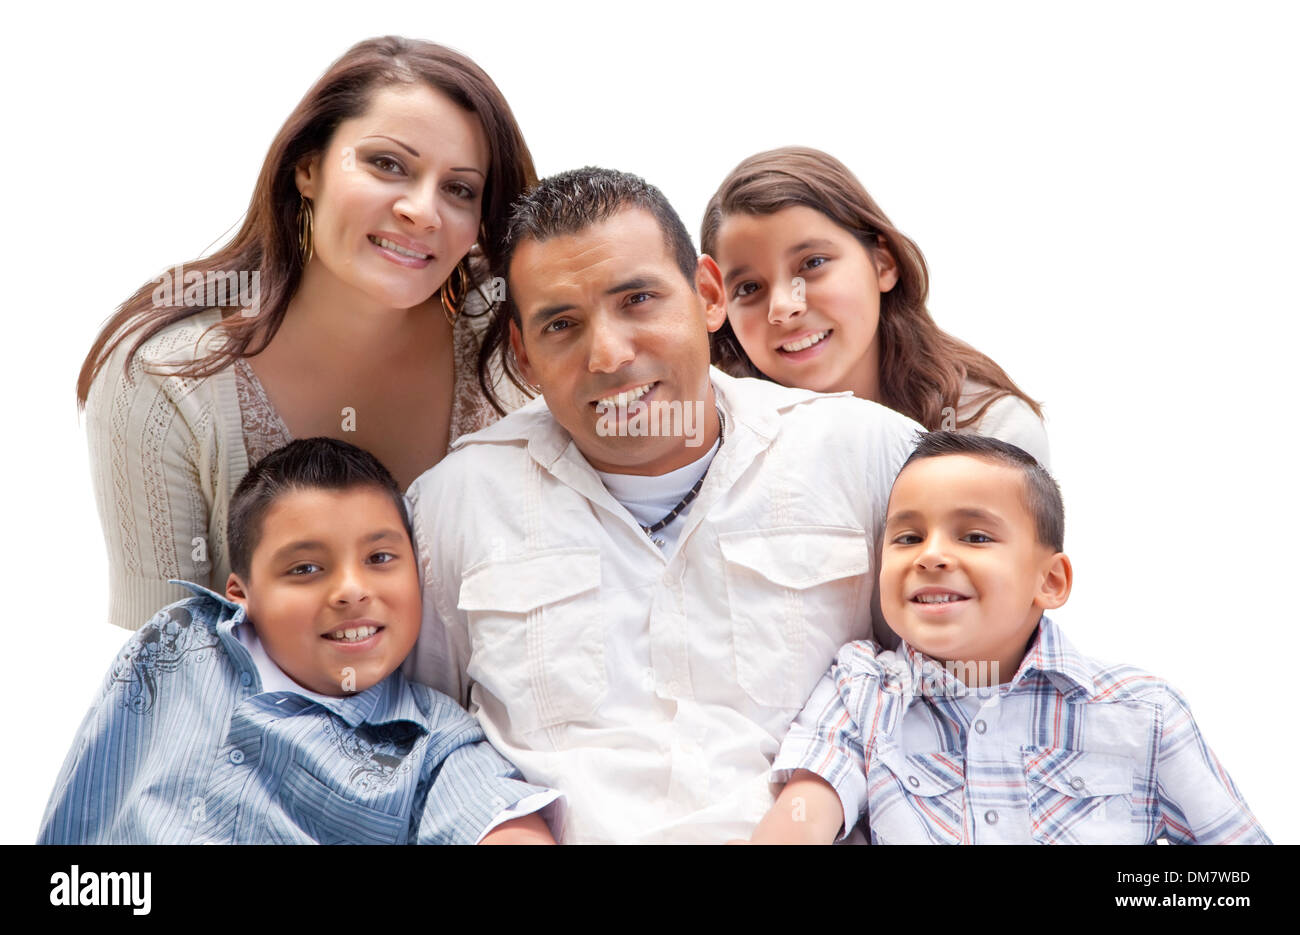 Happy Attractive Hispanic Family Portrait Isolated on a White Background. Stock Photo